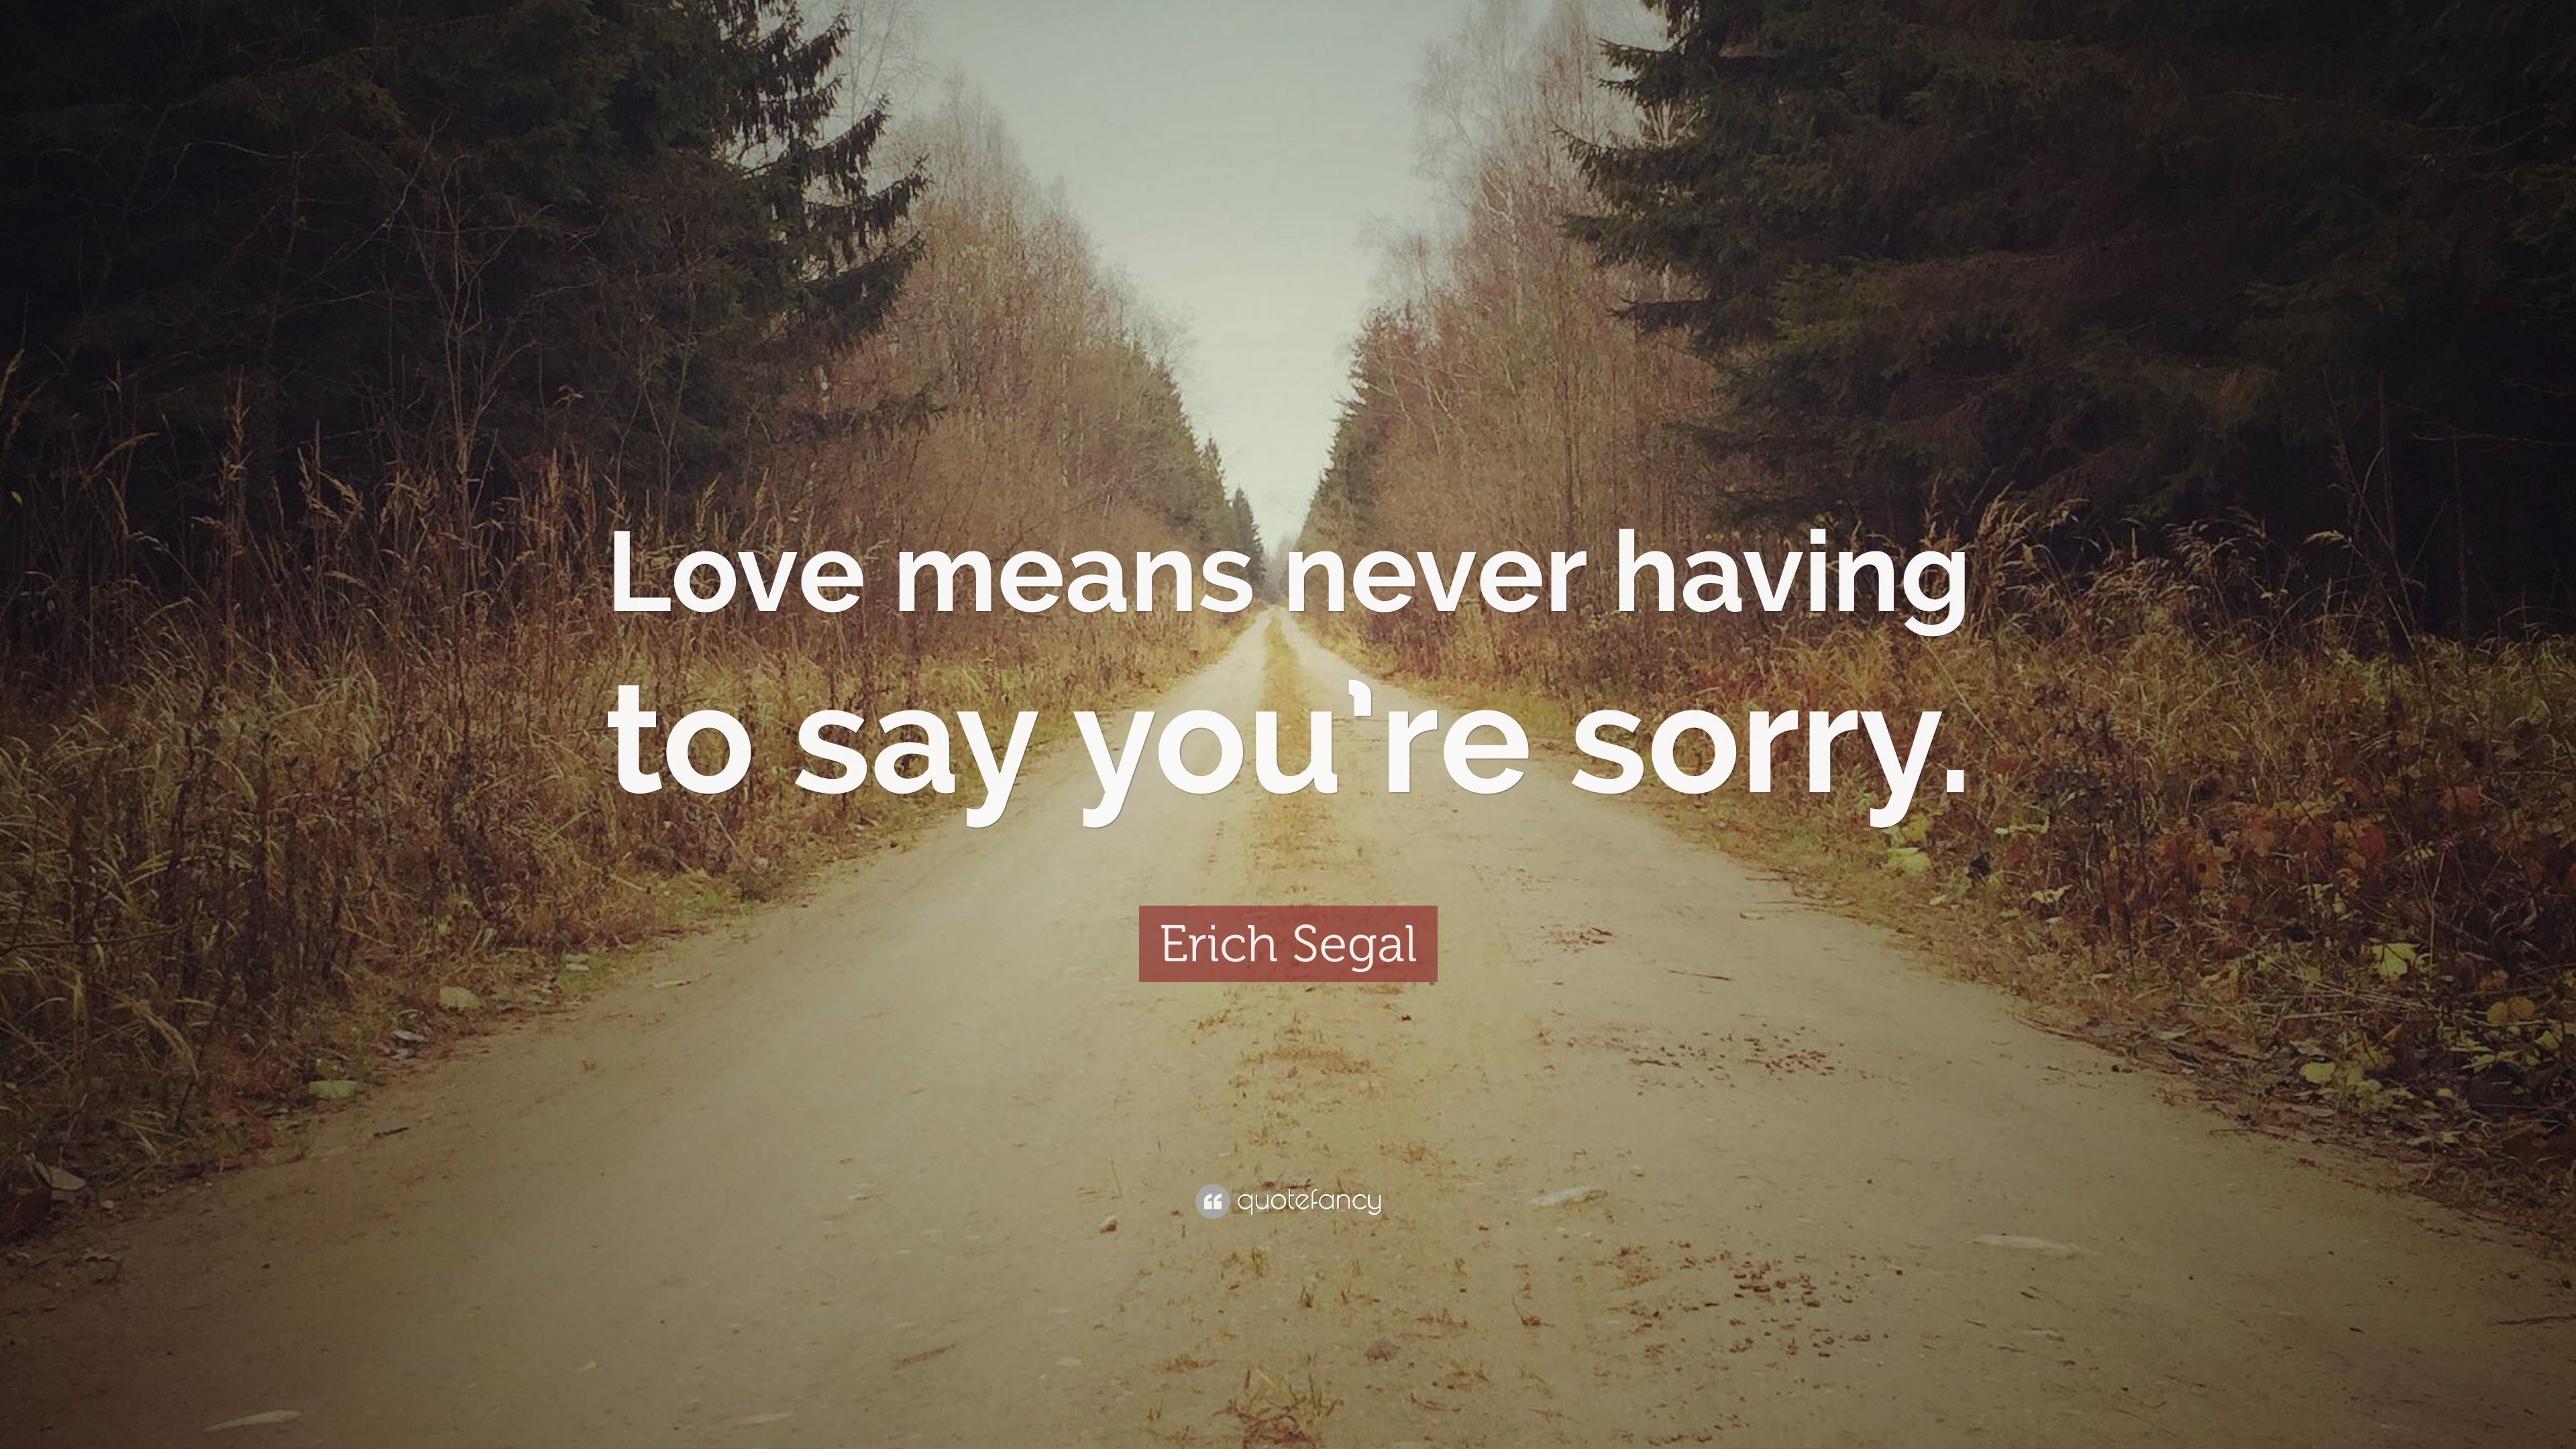 Erich Segal Quote “Love means never having to say you re sorry